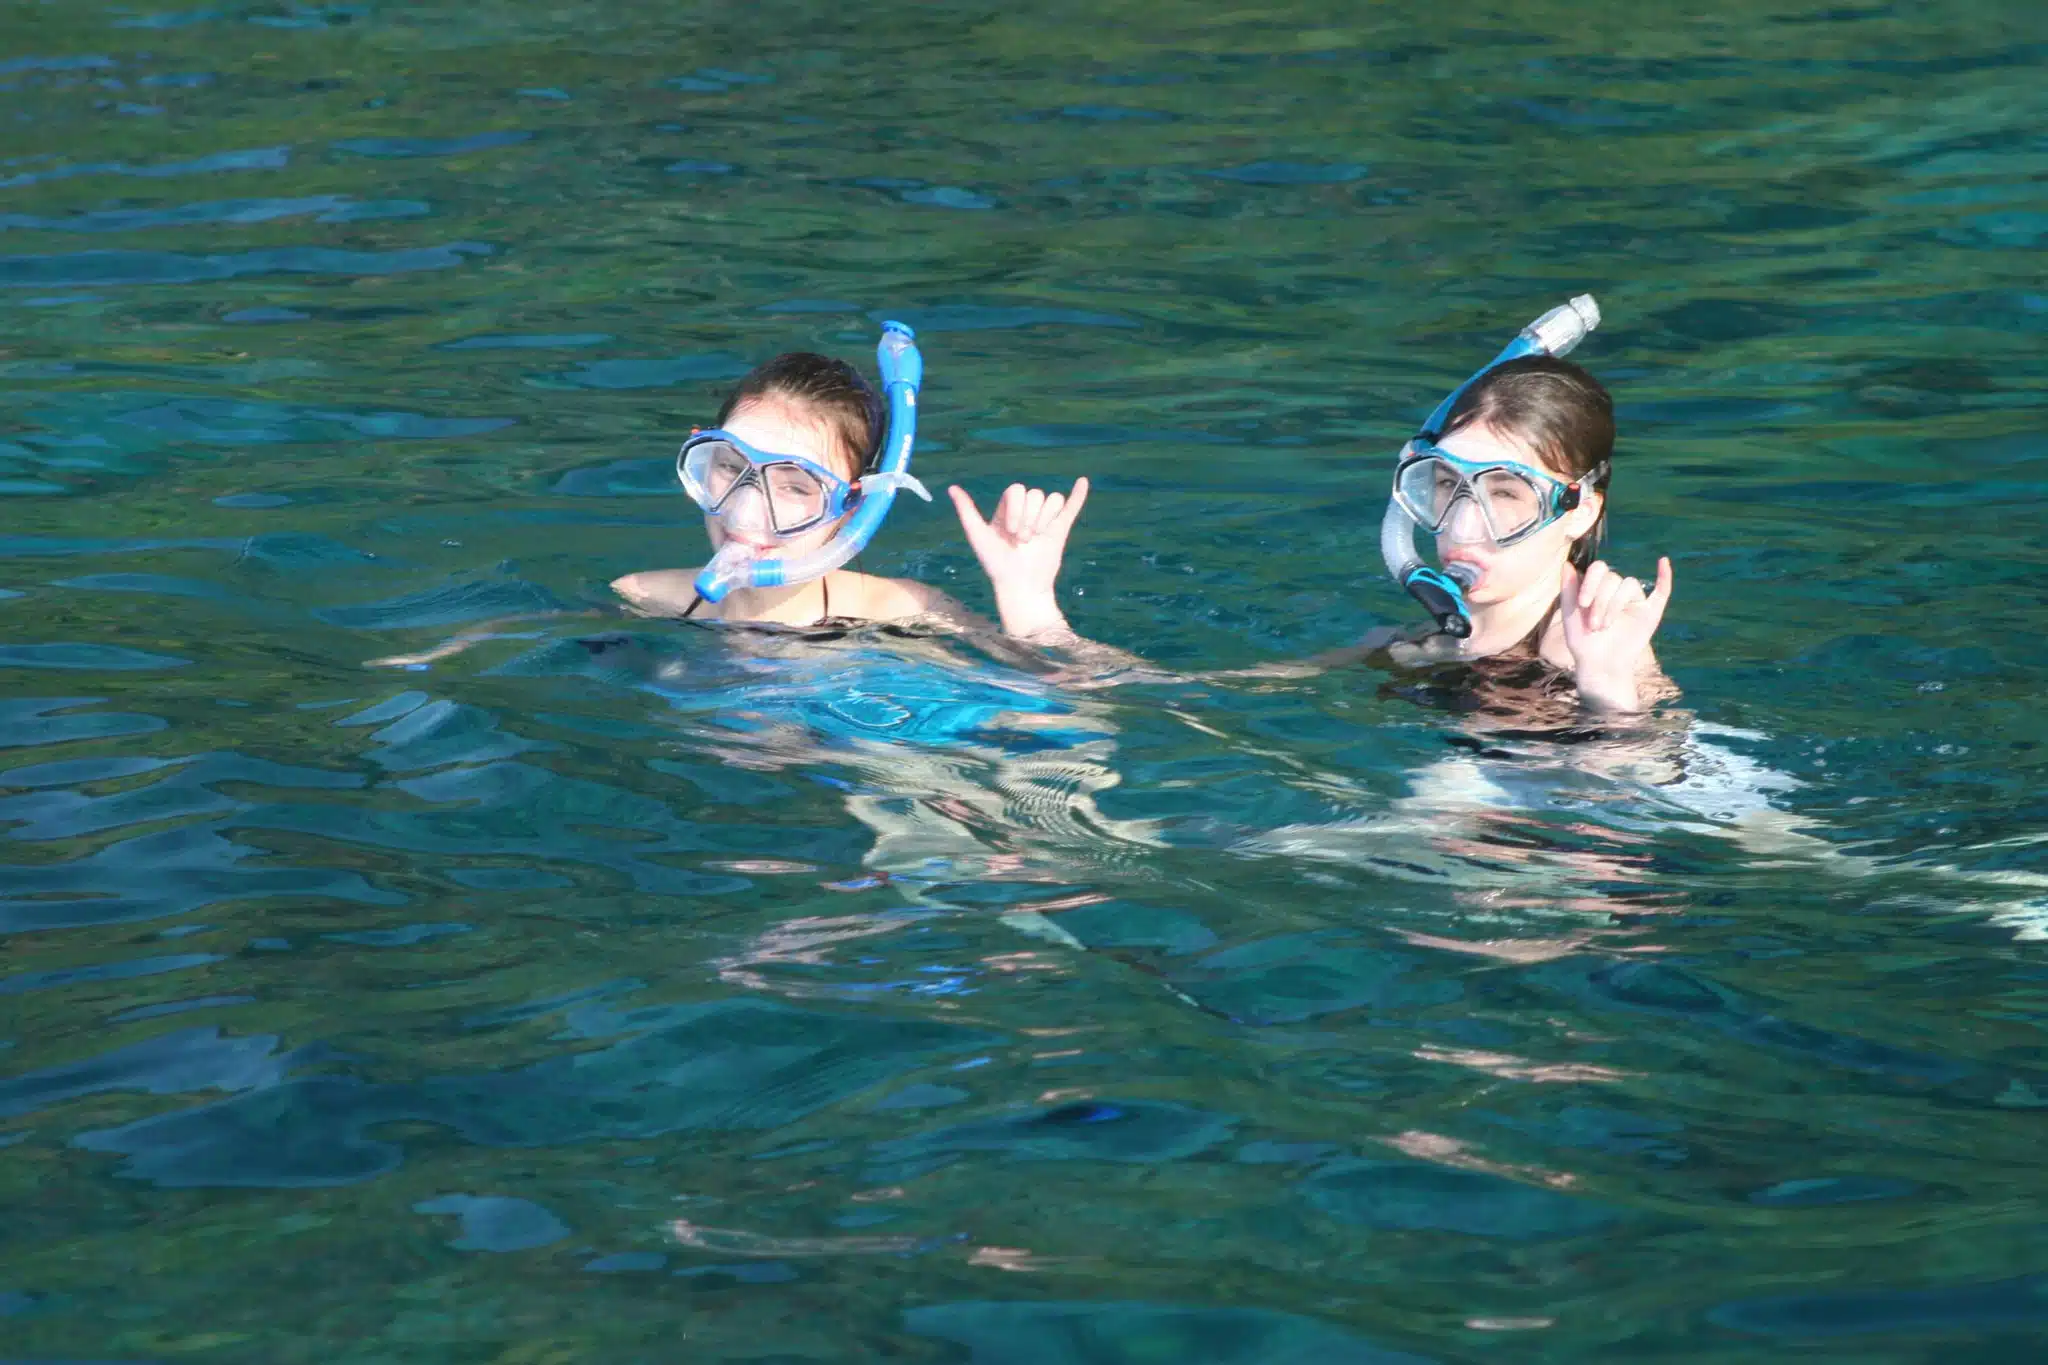 Captain Cook Snorkel Adventure is a Water Activity located in the city of Kailua-Kona on Big Island, Hawaii